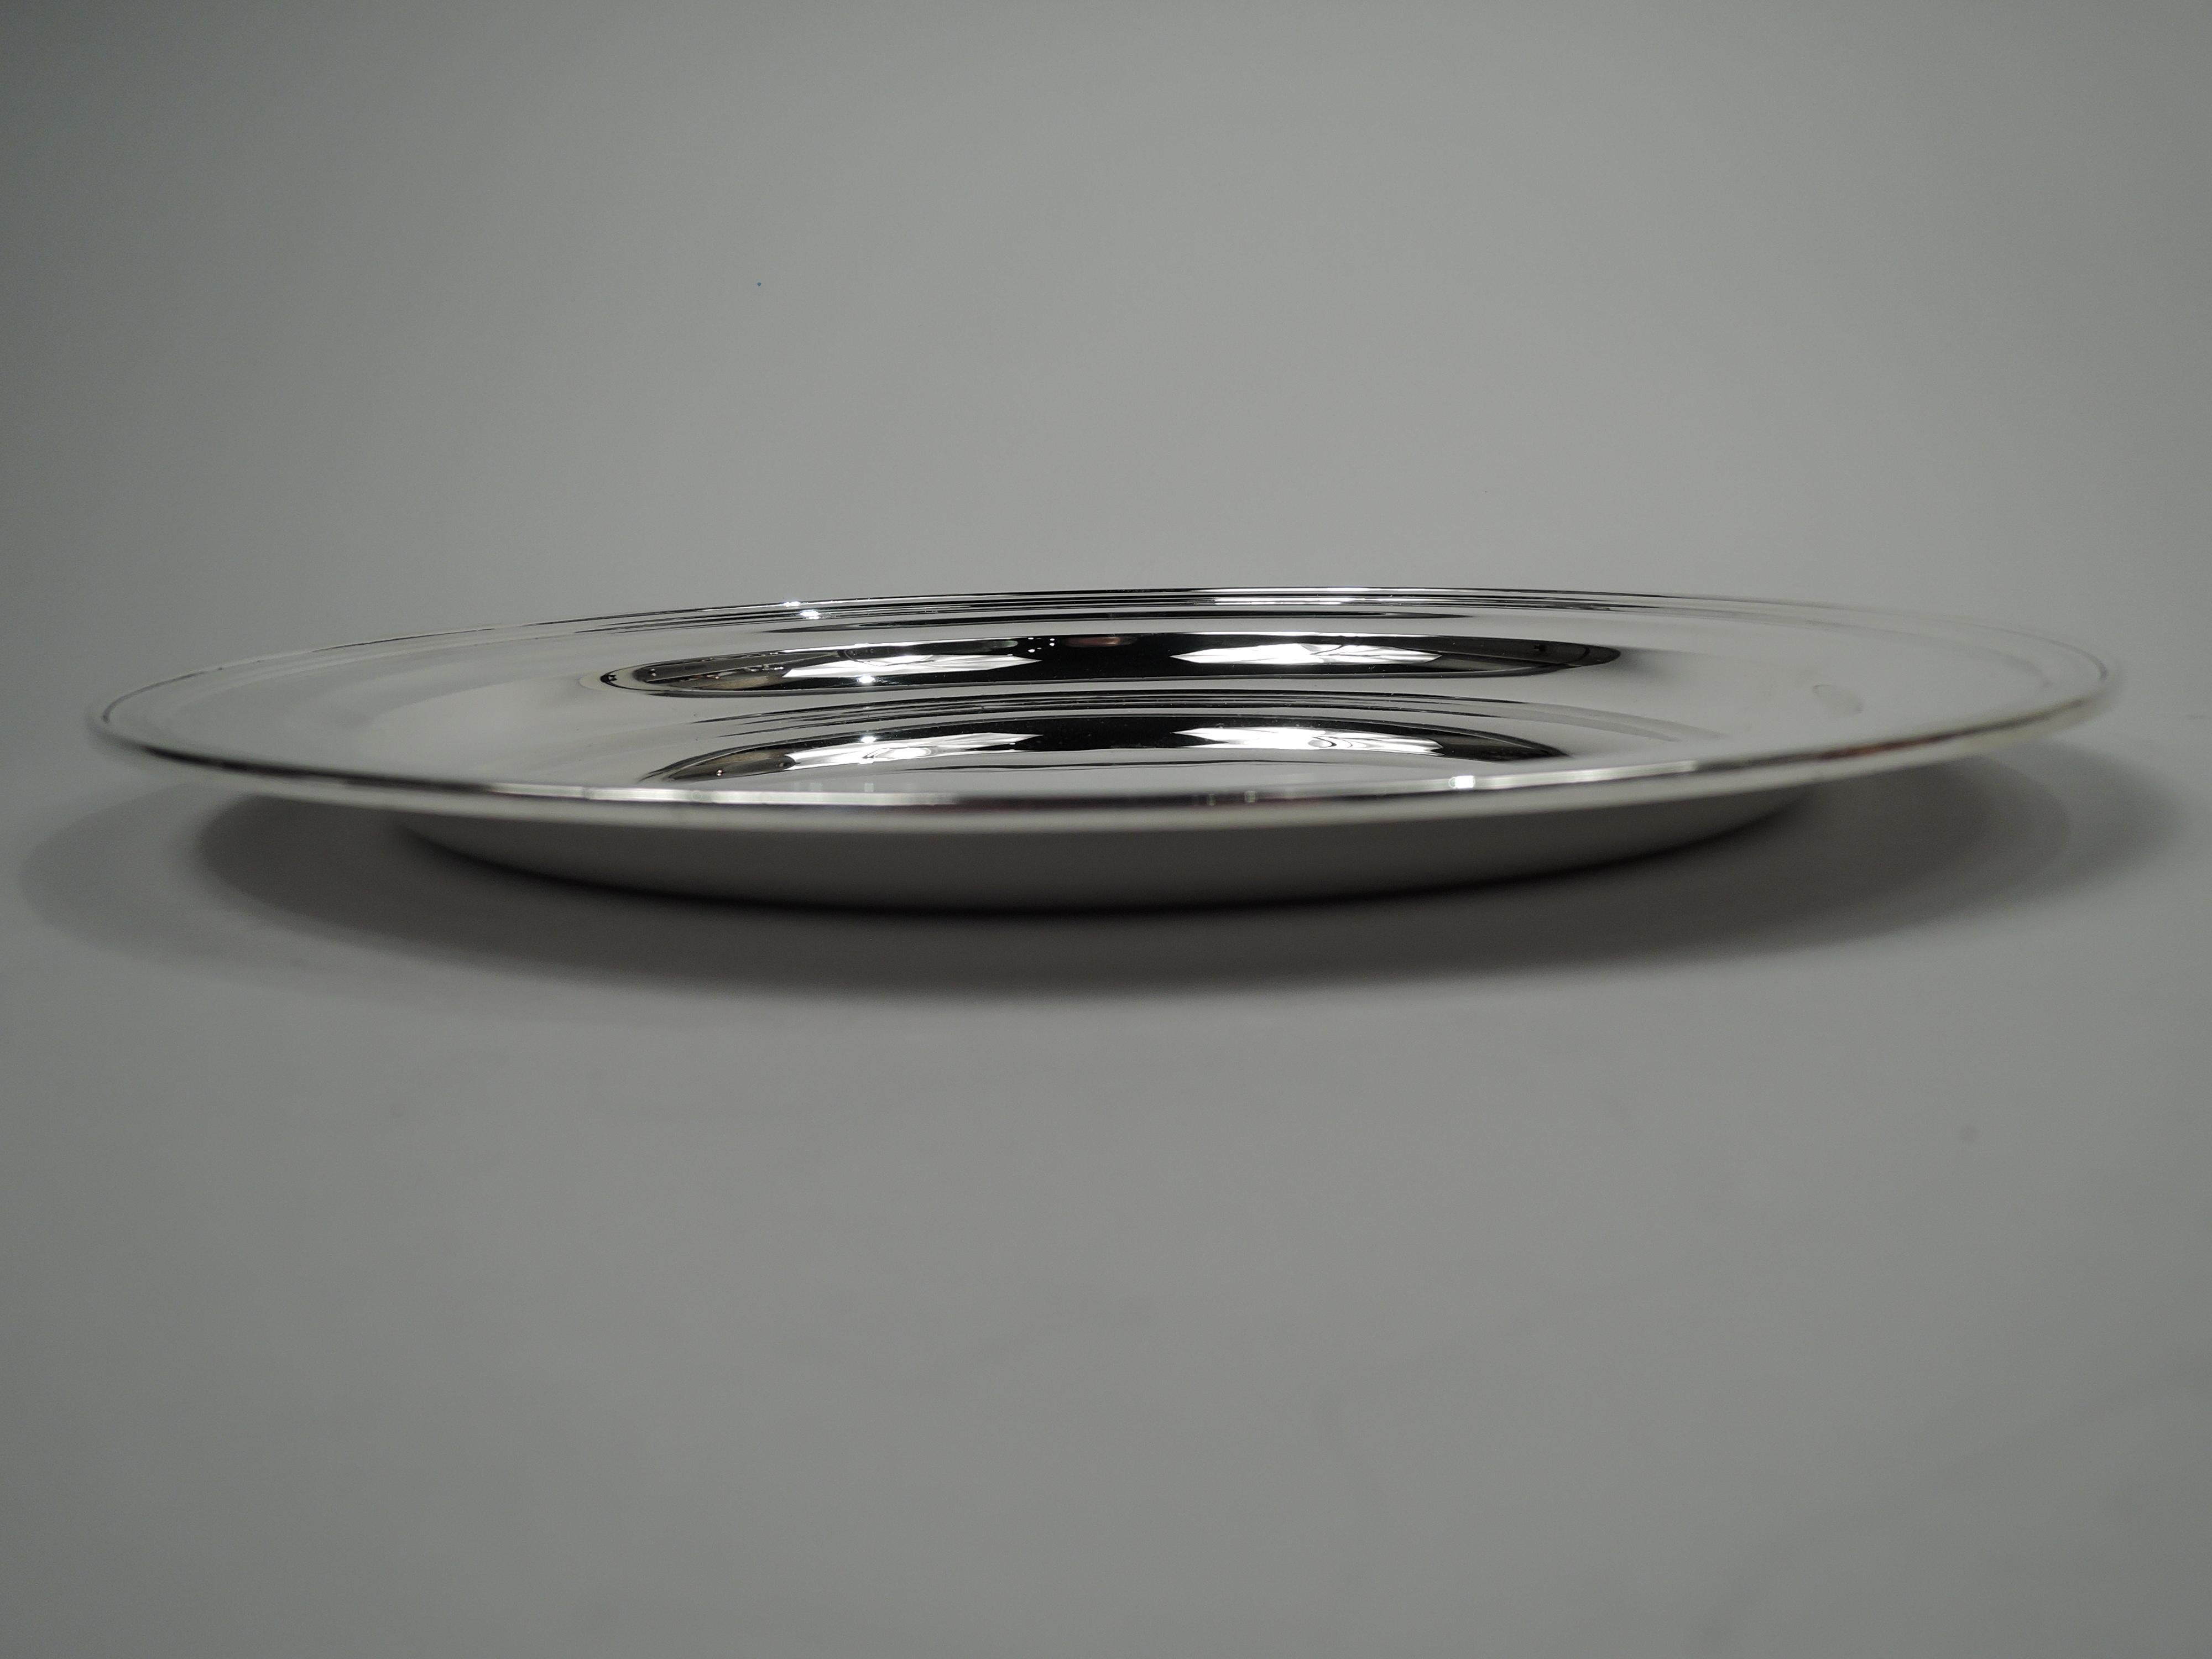 Modern sterling silver tray. Made by Tiffany & Co. in New York, ca 1910. Round with deep well, narrow shoulder, and reeded rim. Fully marked including maker’s stamp, pattern no. 11742C, and director’s letter m. Heavy weight: 32 troy ounces. 